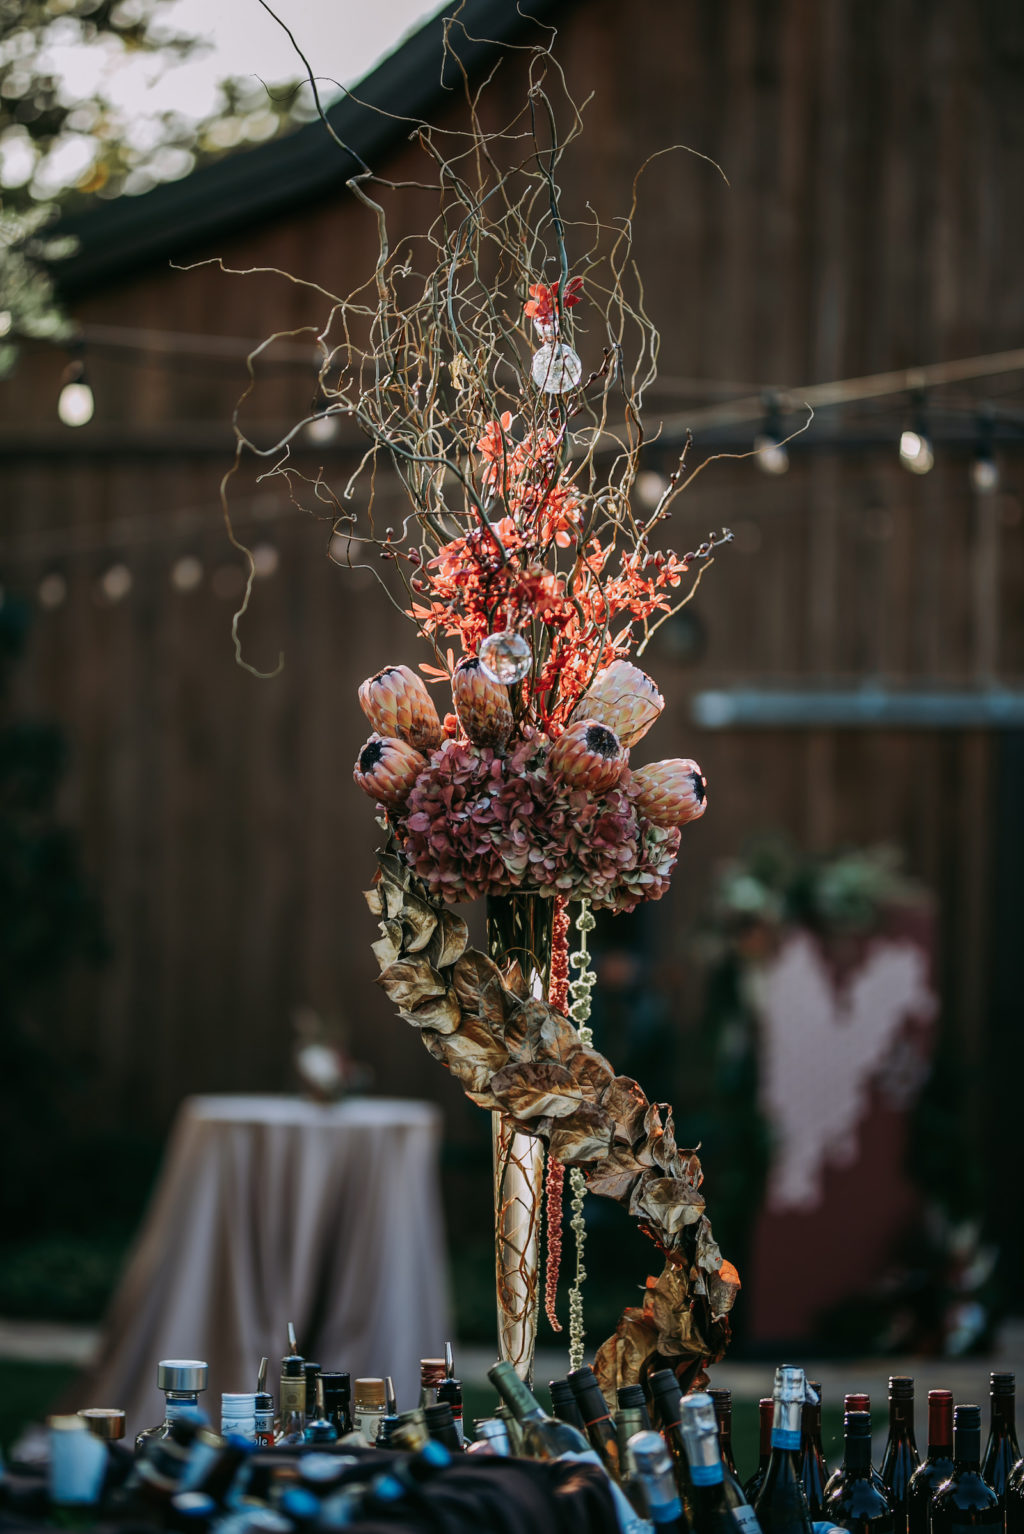 Rustic Unique Wedding Floral Arrangement, Closed King Proteas, Wooden Whimsical Sticks, Glass Bulbs Hanging, Curved Leaves and Hanging Amaranthus